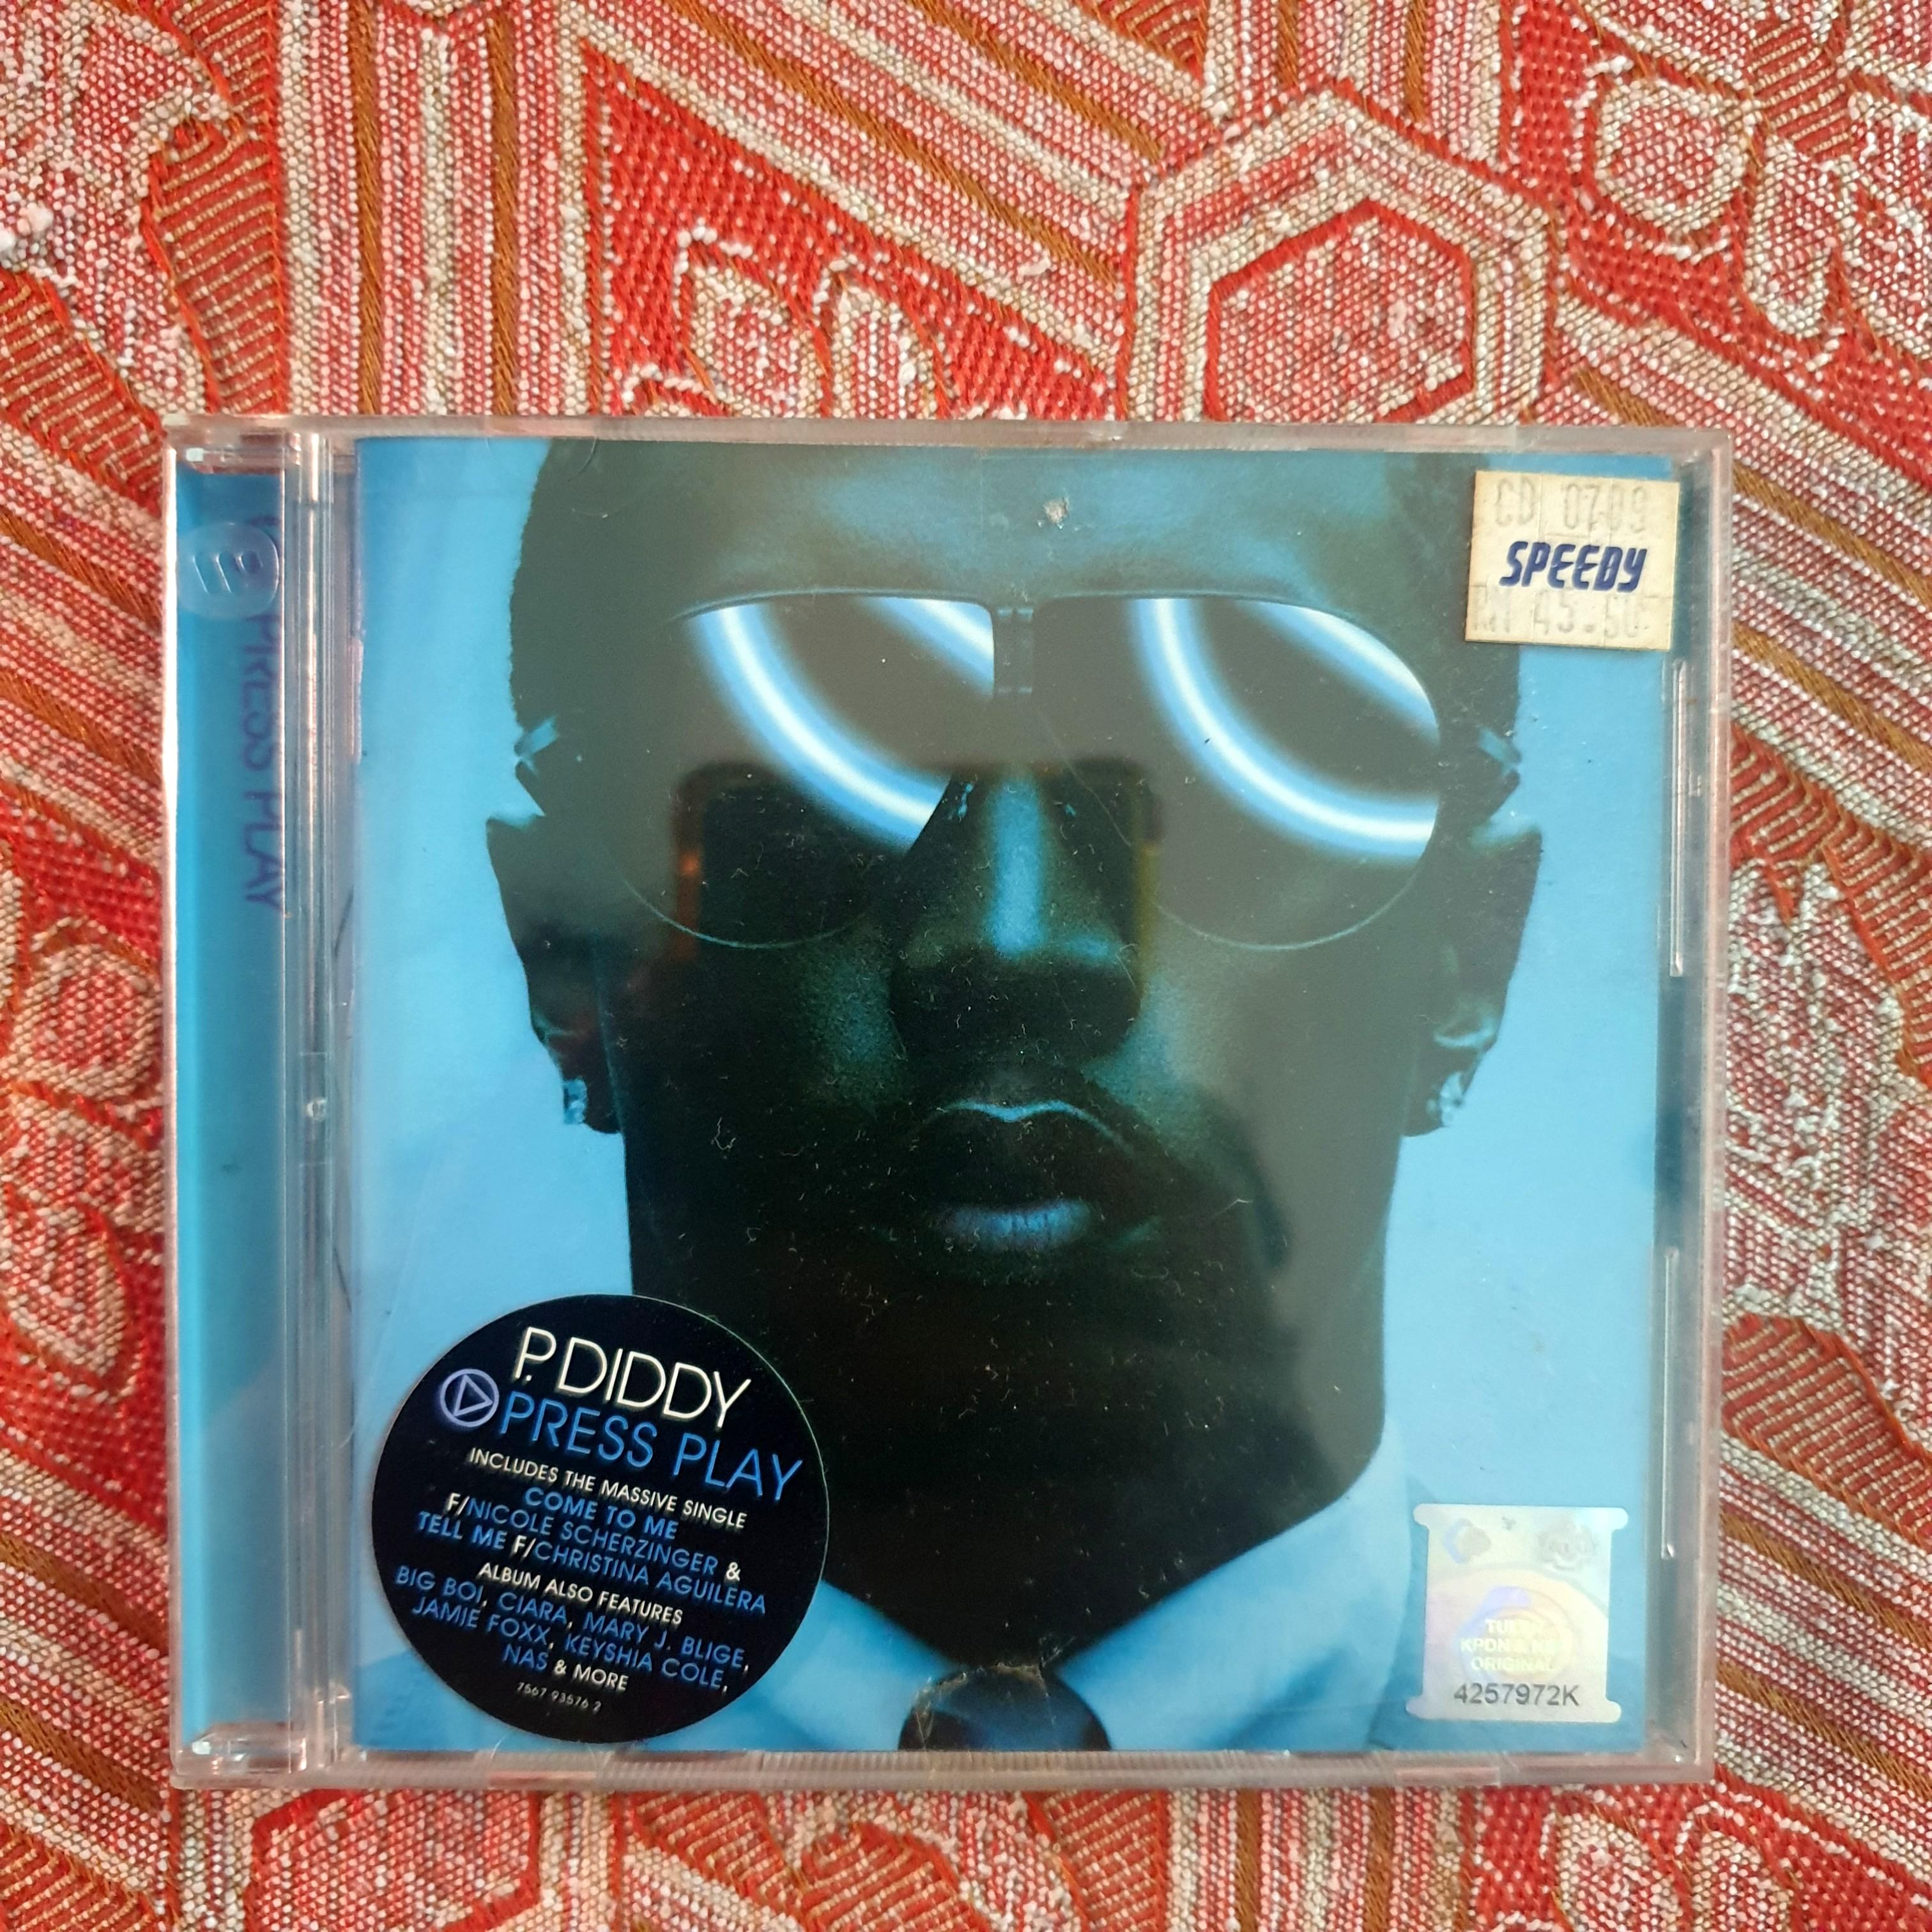 DIDDY - PRESS Play: Best Buy Exclusive - 2 CD - Explicit Lyrics Limited VG  $19.49 - PicClick